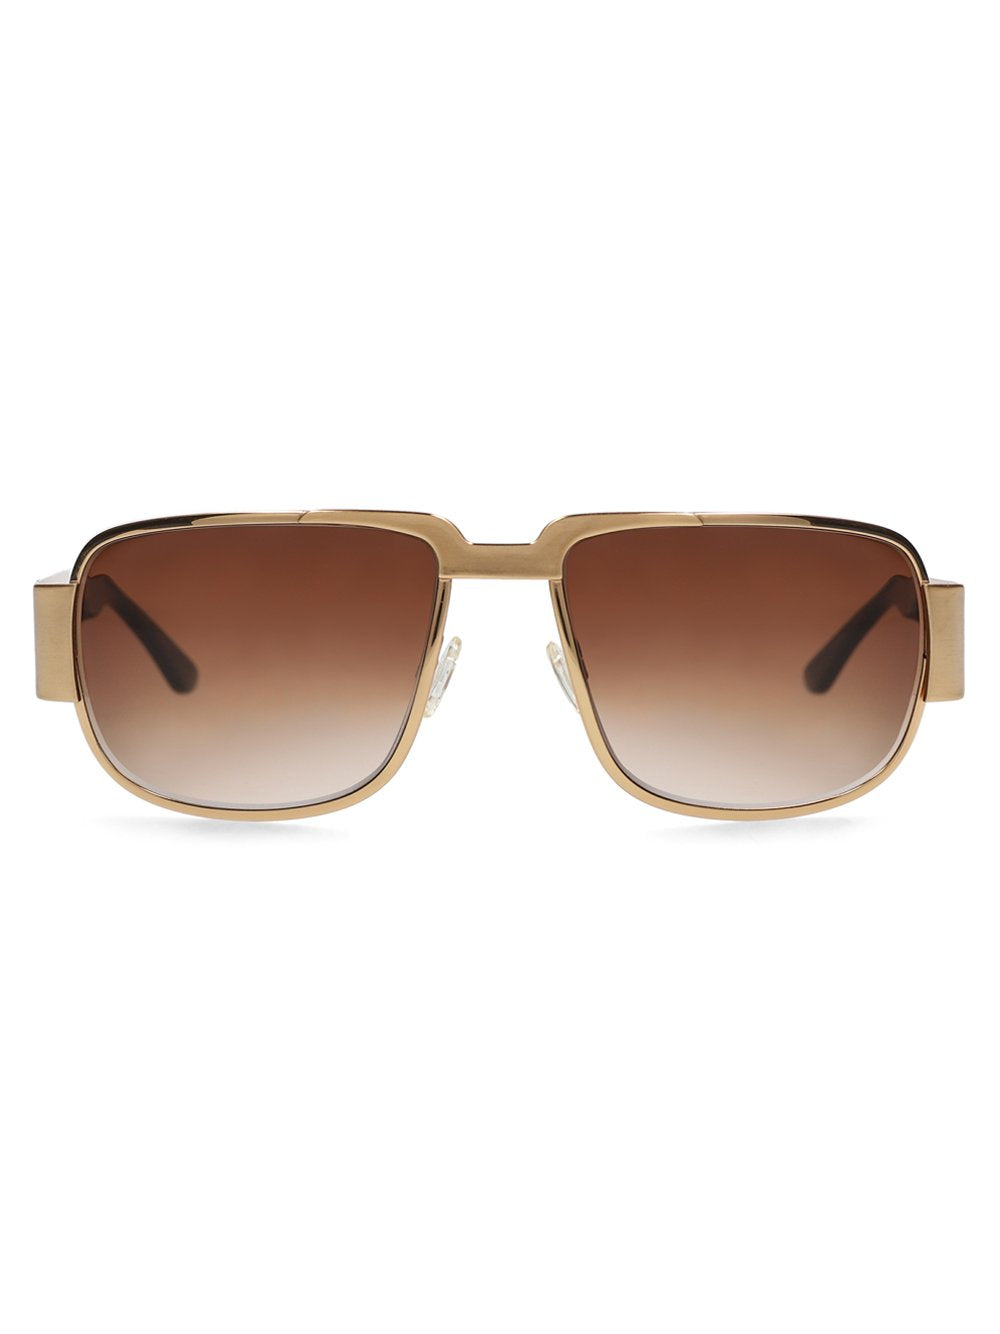 NEOSTYLE NAUTIC Metal Sunglasses - André Opticas